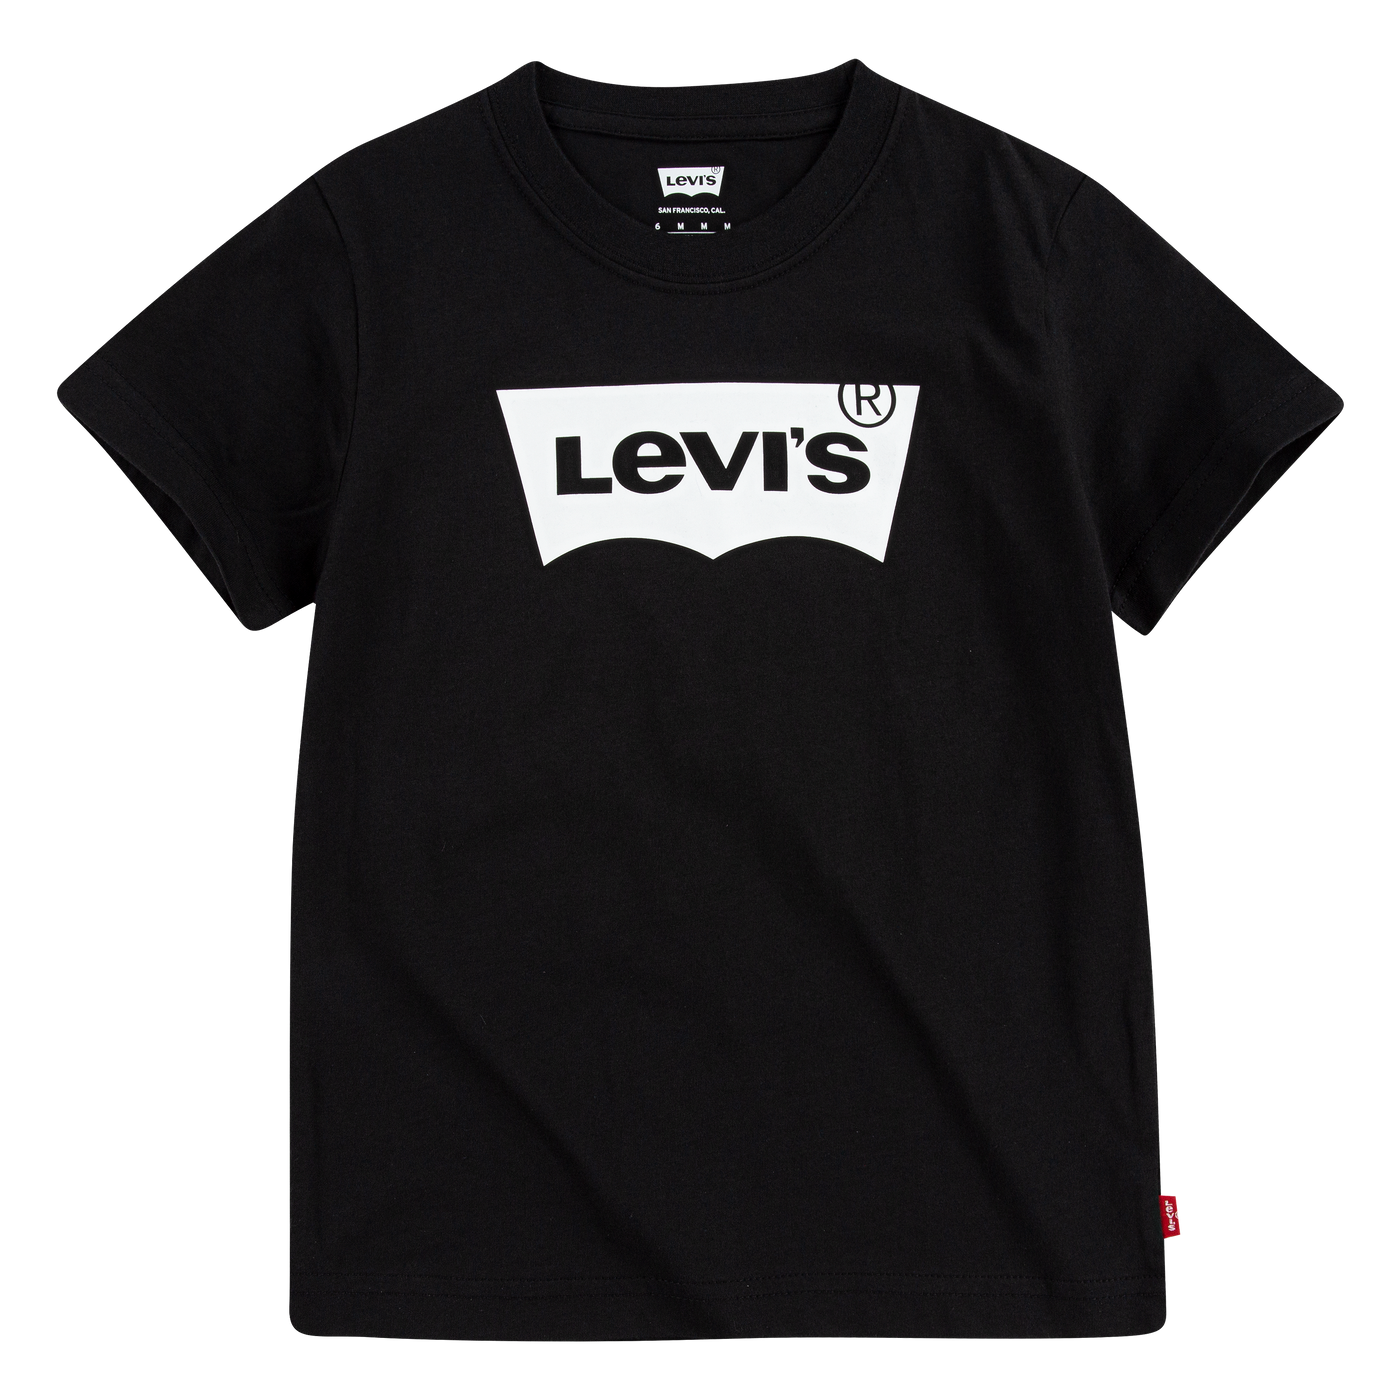 Buy Stylish Levis T-Shirts Collection At Best Prices Online